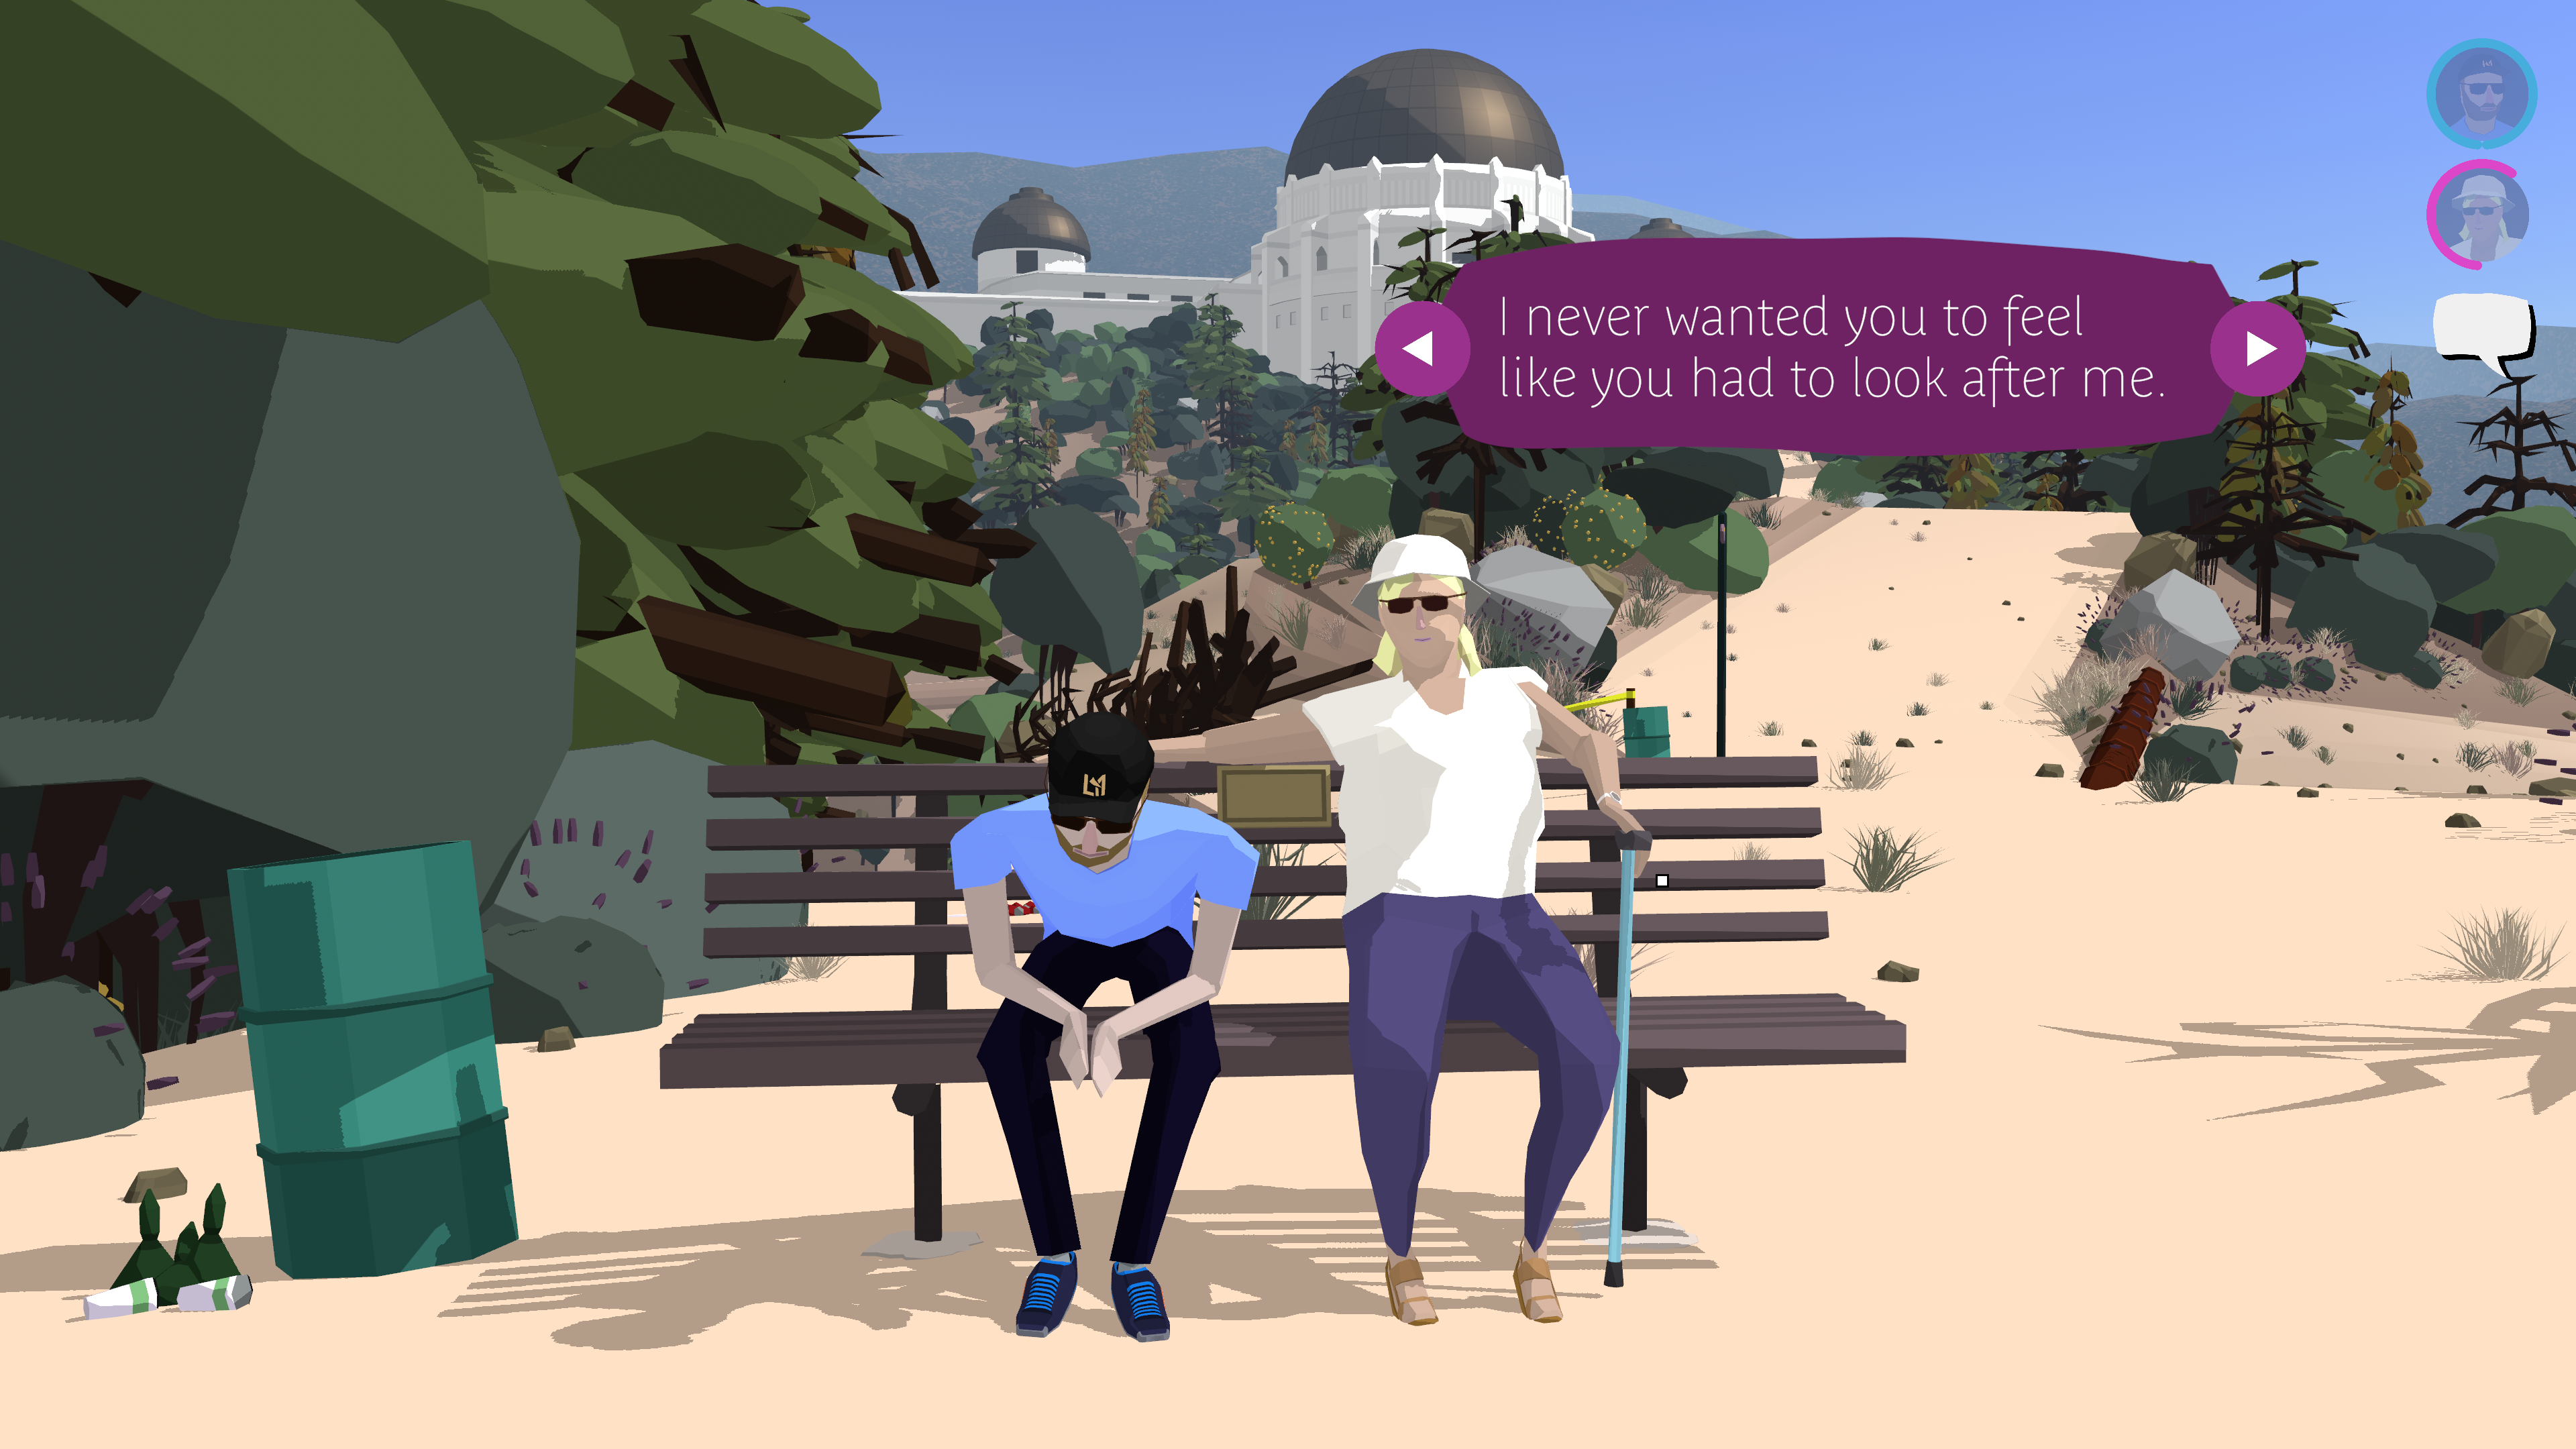 Russell and Linda, sitting on a bench with the Griffith Park Observatory in the background. Linda's dialogue box is purple, indicating a choice. The current option is: 'I never wanted you to feel like you had to look after me.'